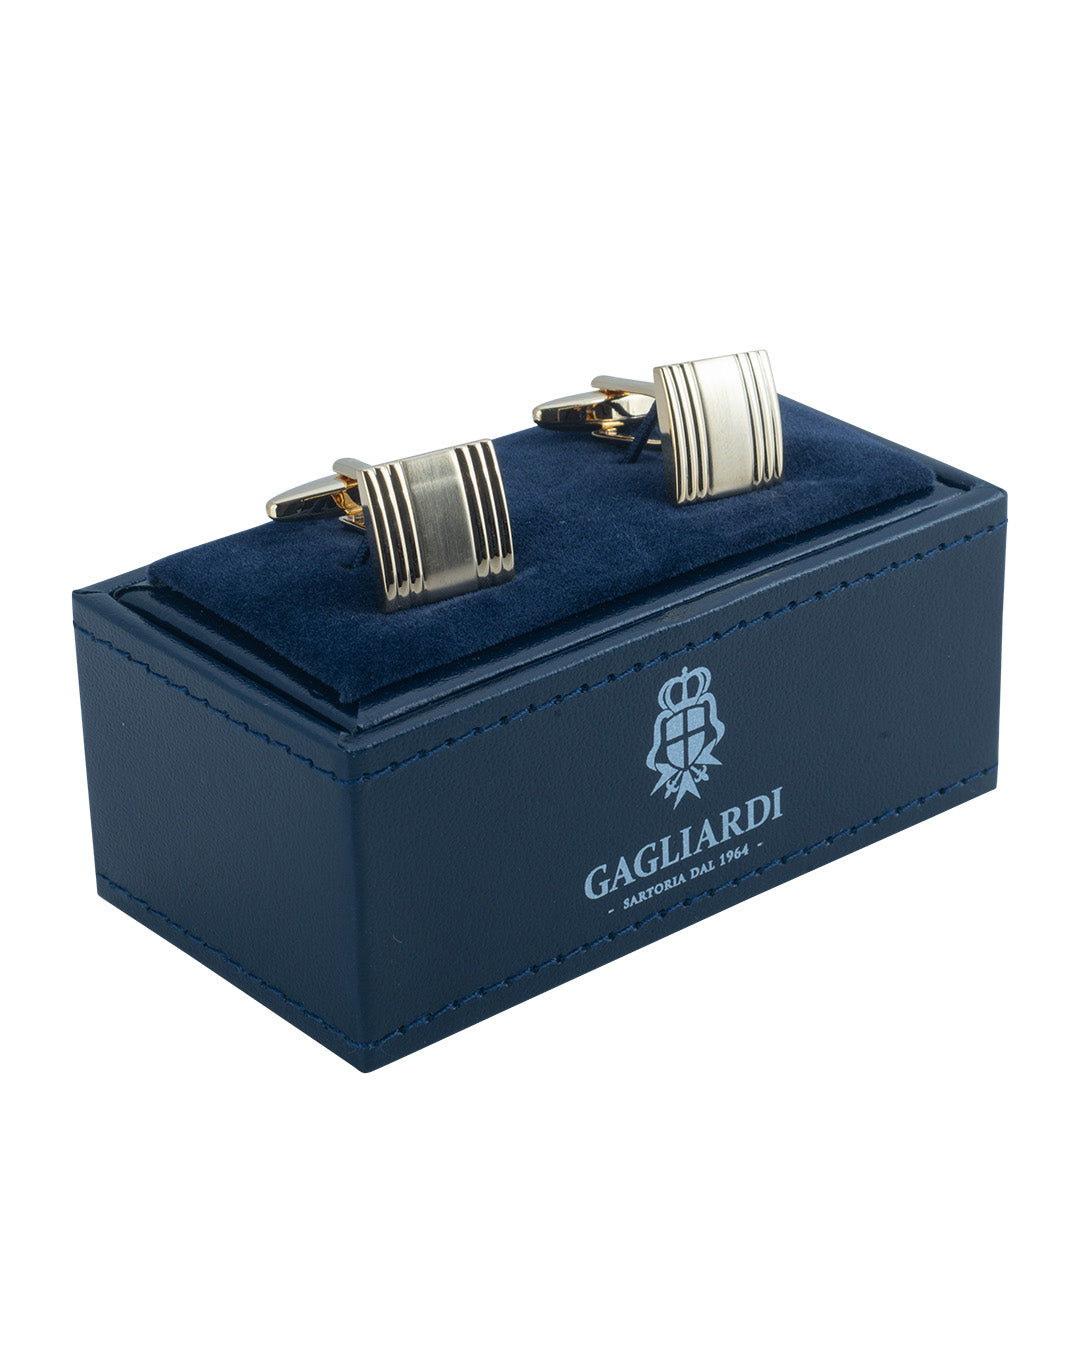 Gold Square Ribbed Cufflinks